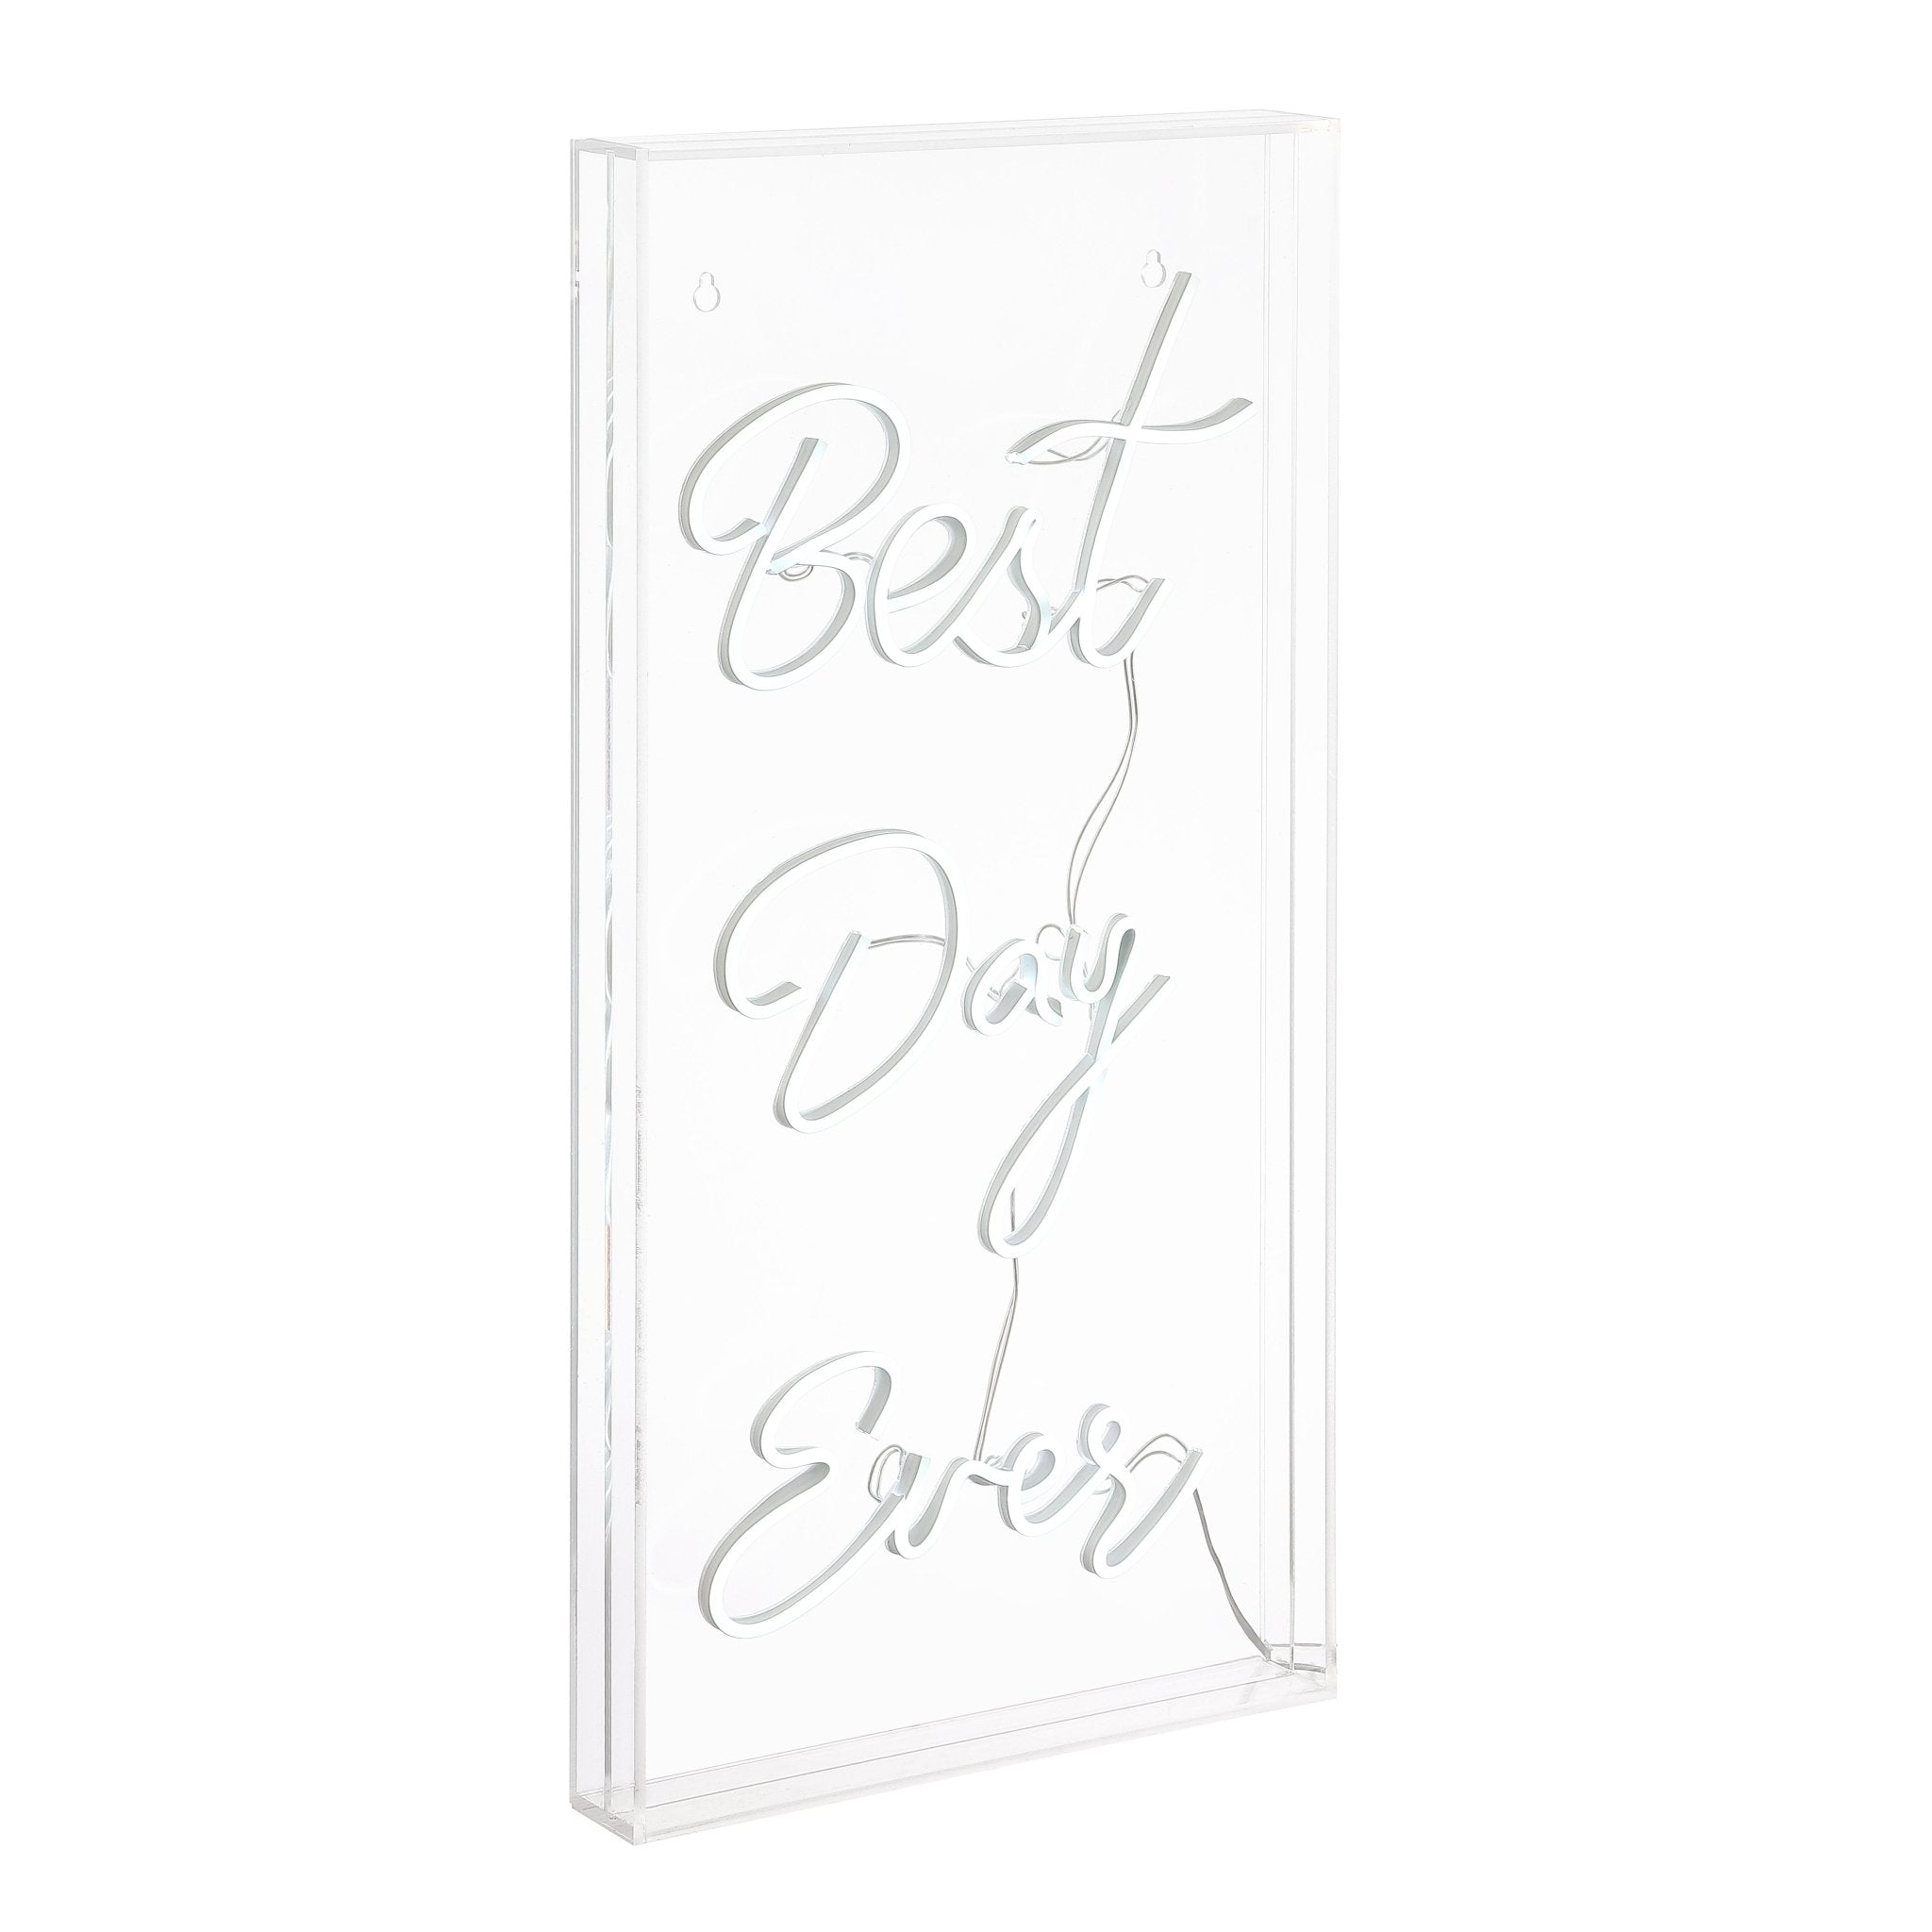 Best Day Ever X Contemporary Glam Acrylic Box USB Operated LED Neon Light - Pier 1